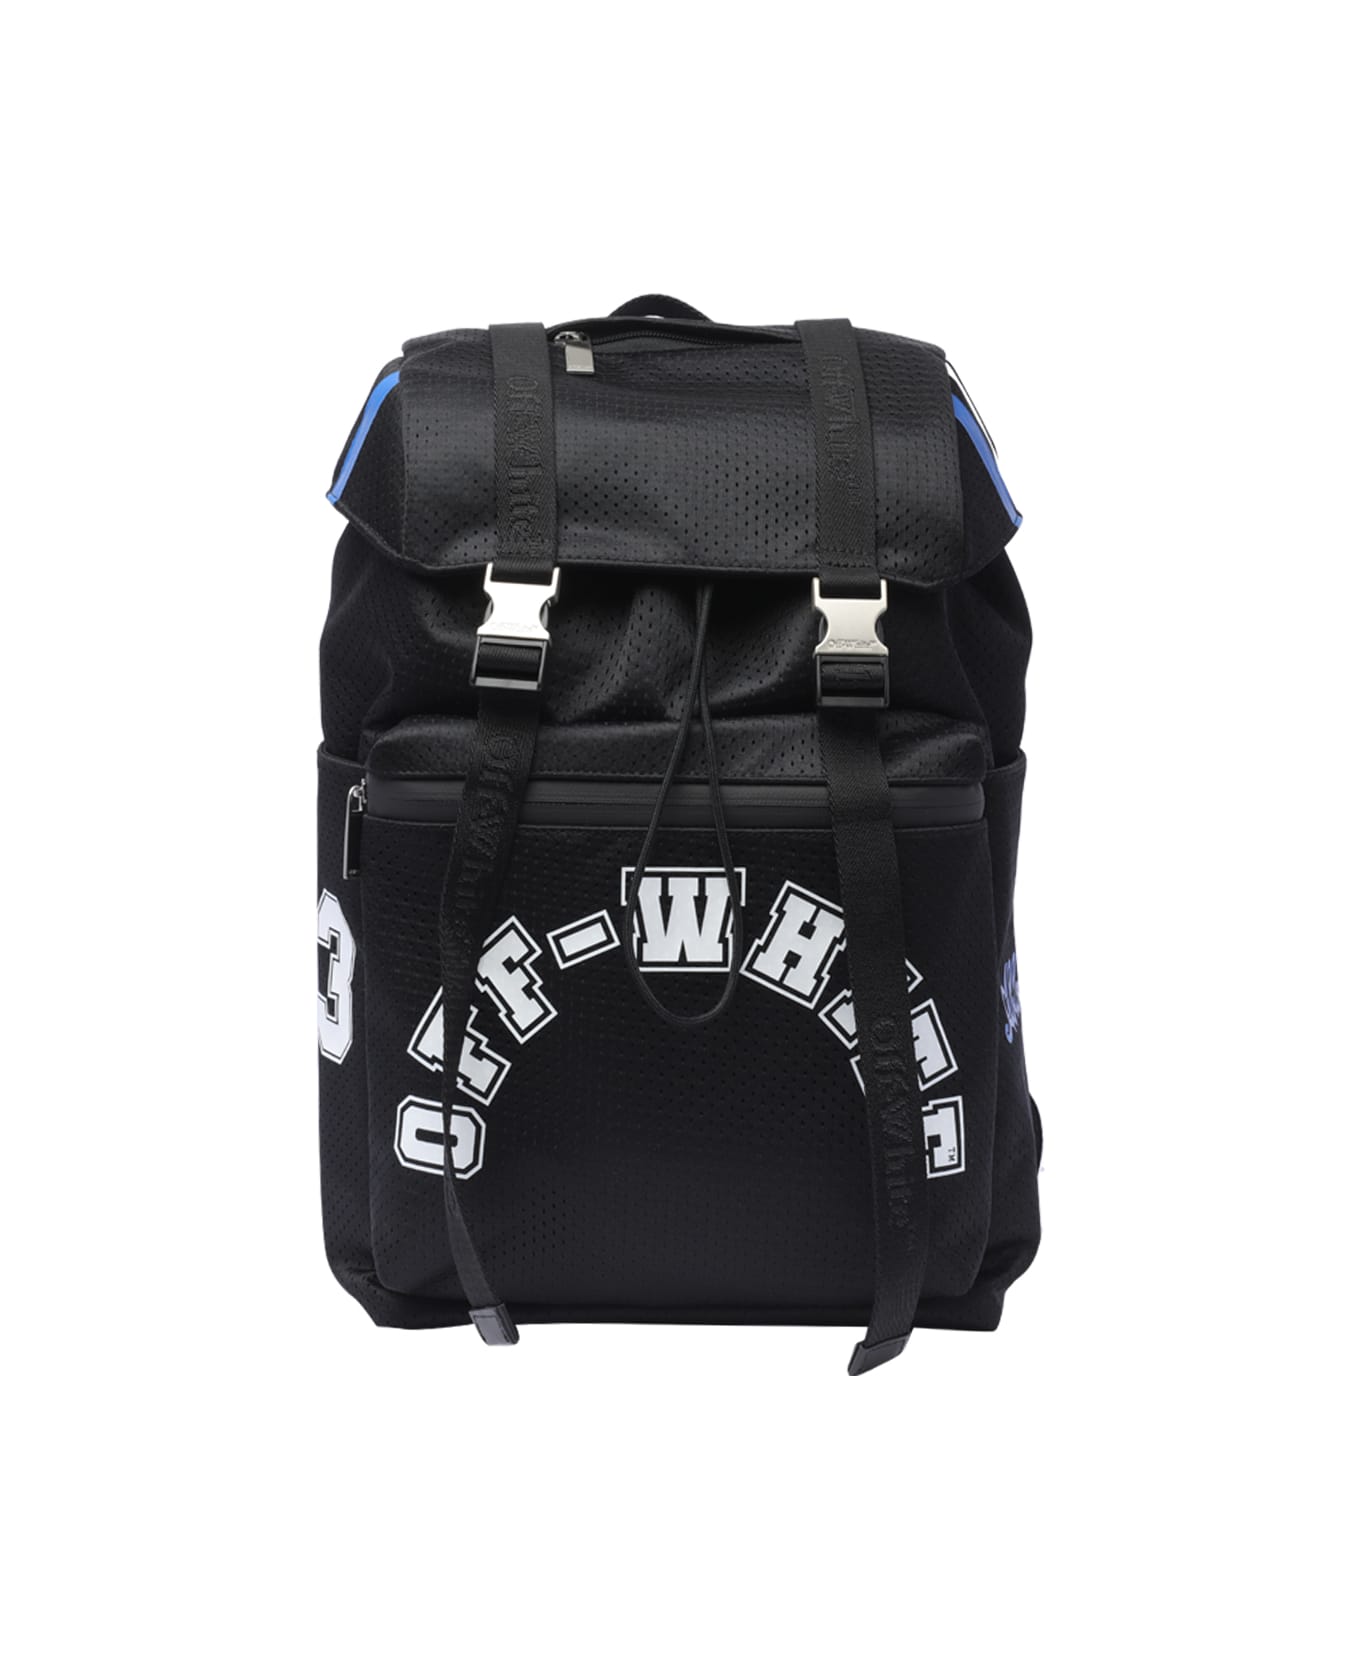 Off-White Outdoor Backpack - Black/white